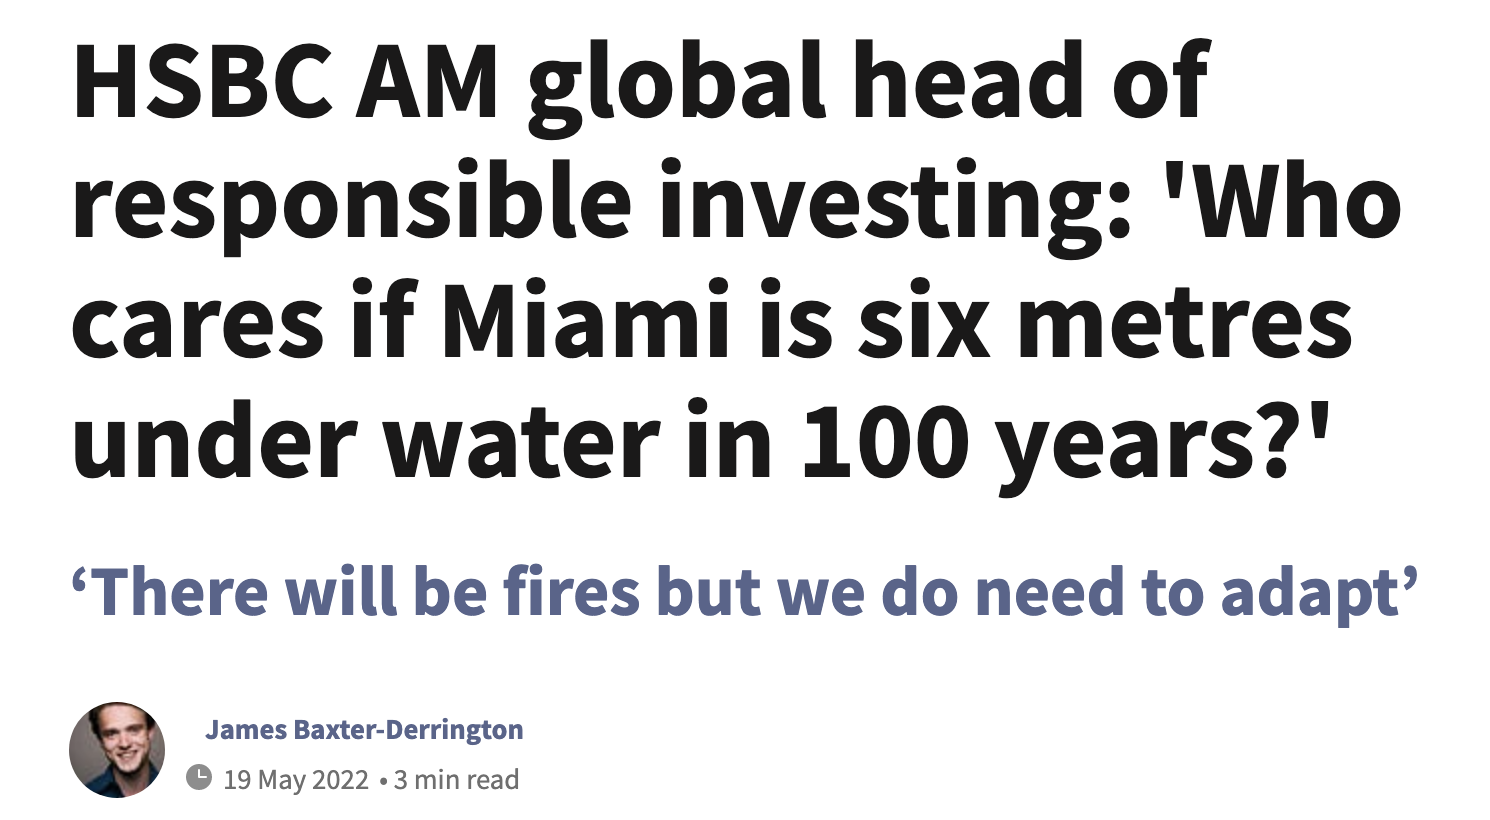 &quot;HSBC AM global head of responsible investing: &#x27;who cares if miami is six metres under water in 100 years?&#x27; &#x27;There will be fires but we do need to adapt&#x27;